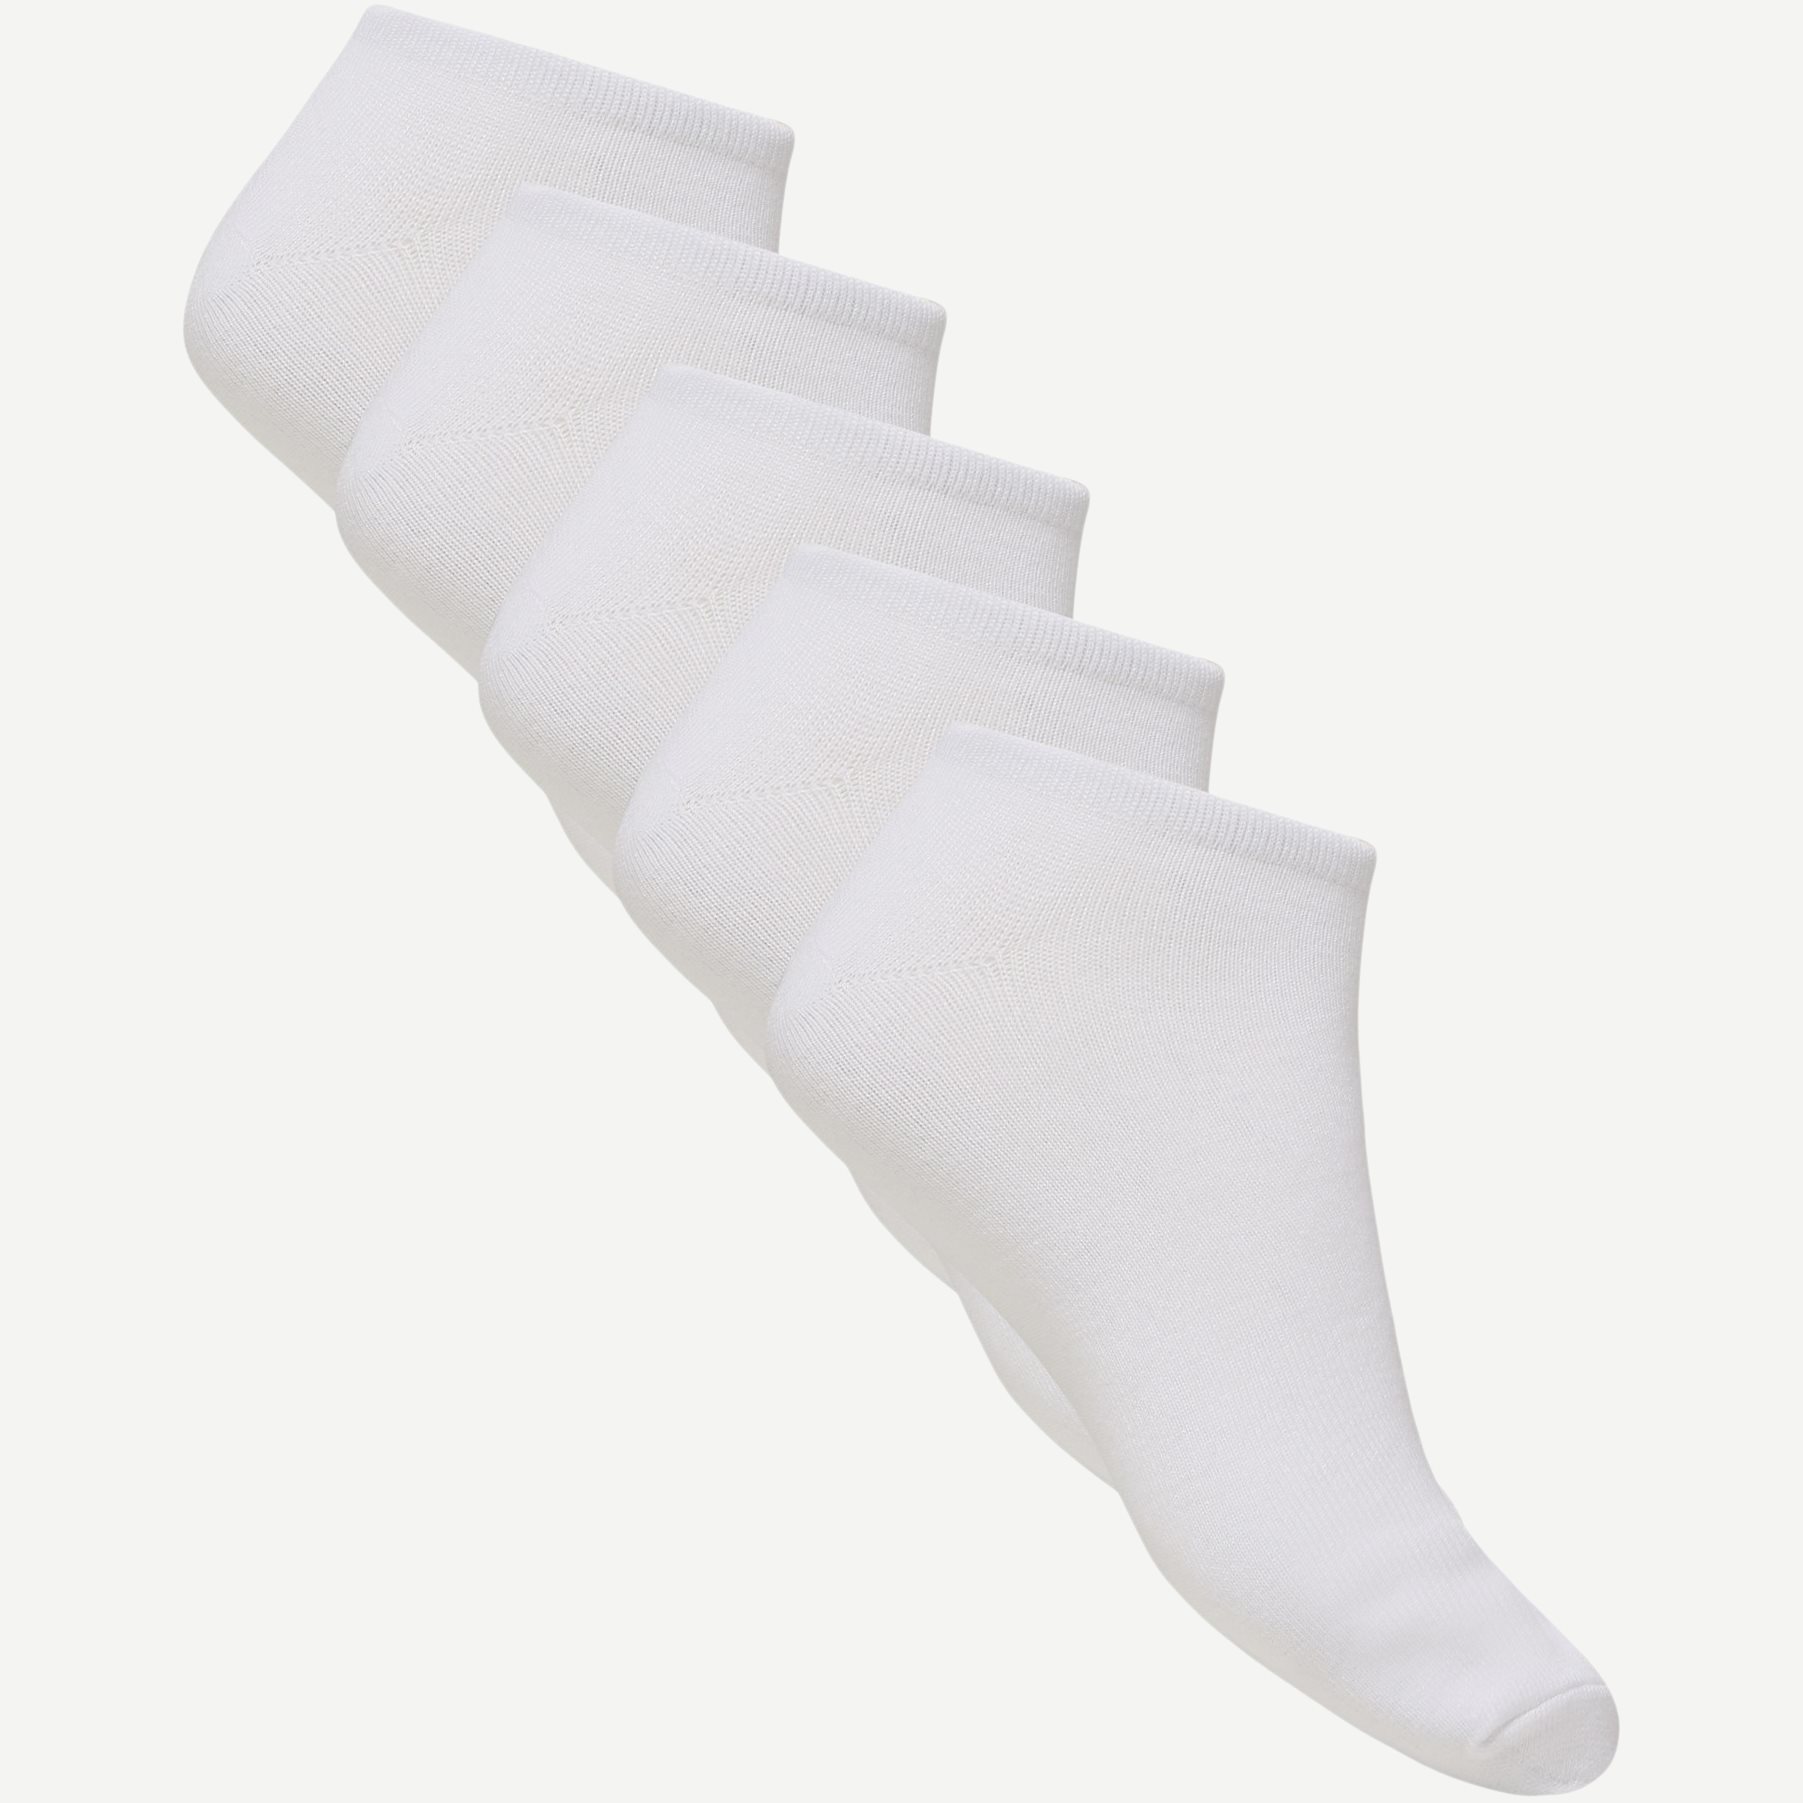 URBAN QUEST Socks 1440 5-PACK BAMBOO FOOTIE White